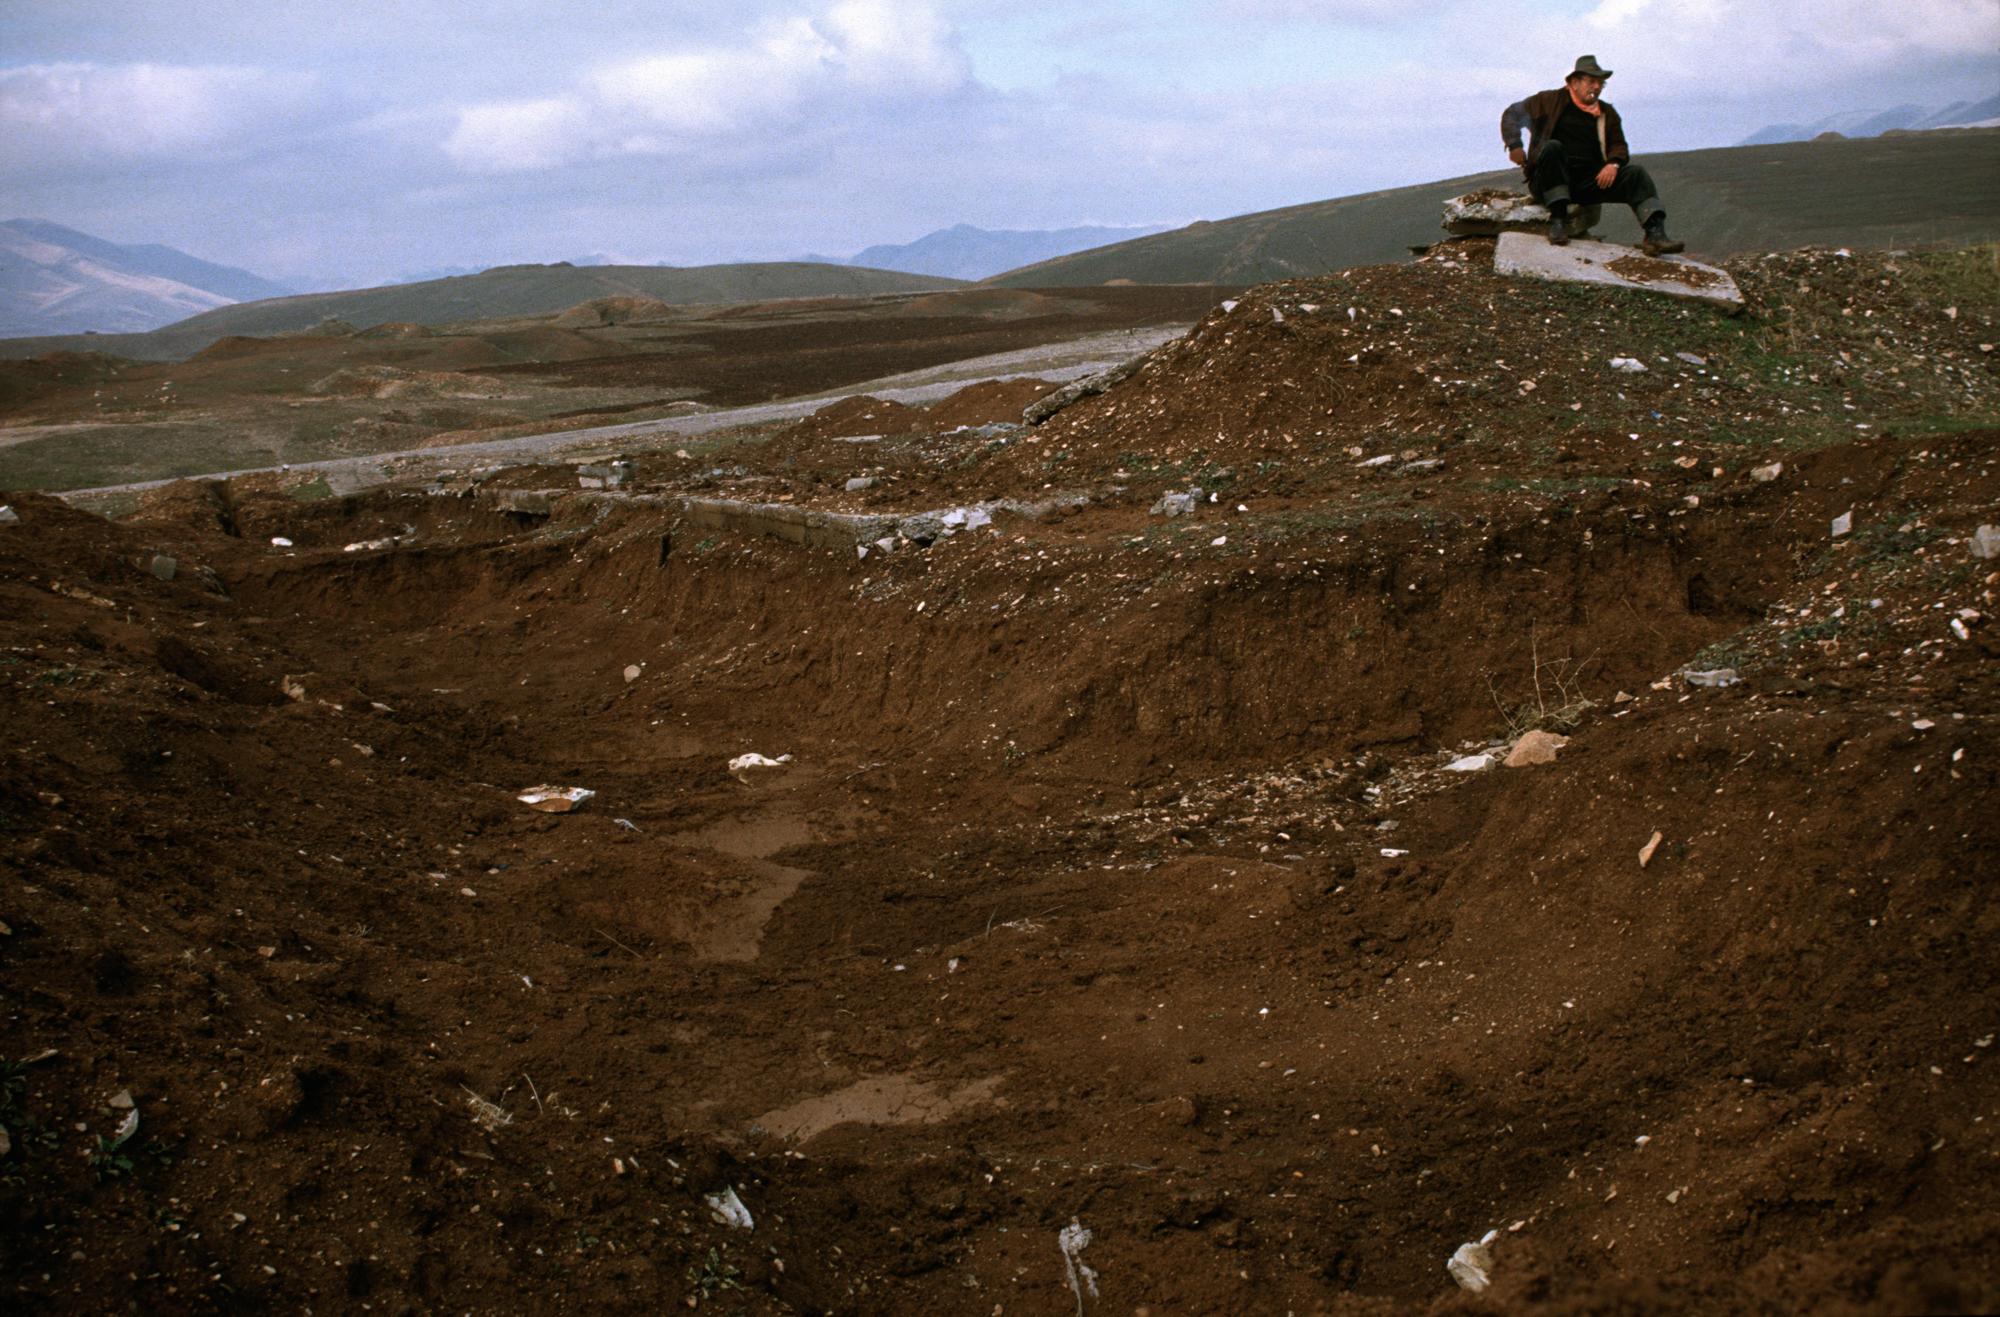 Dr. Clyde Snow overlooks the exhumation of graves at Sardow military base in Sulaimaniya....